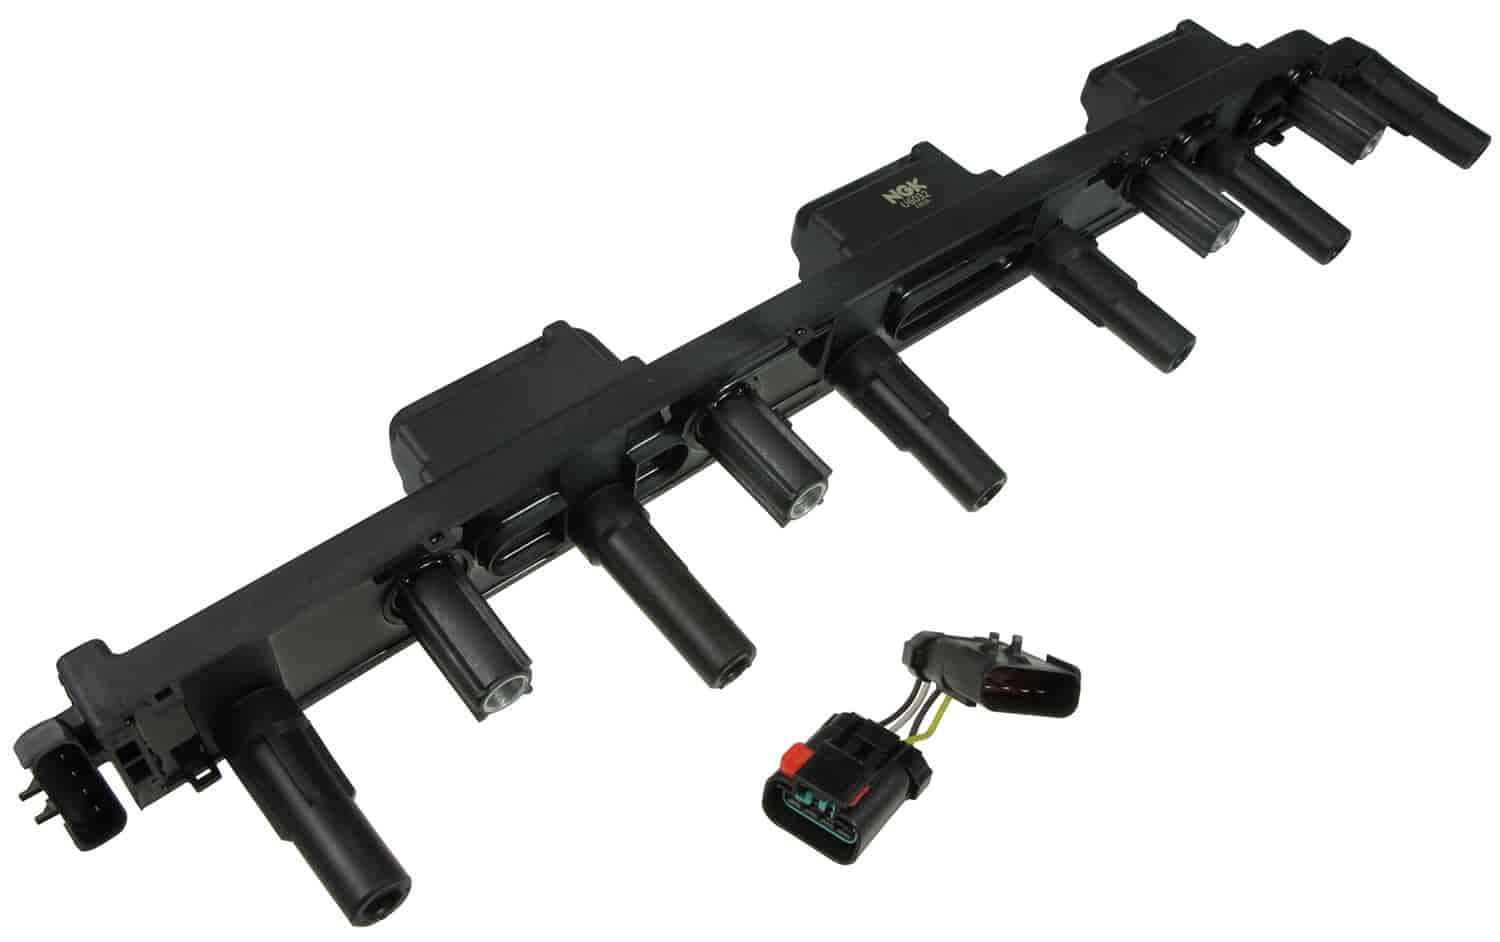 Coil-on-Plug Rail Ignition Coil Assembly 2000-2001 Jeep Cherokee, 1999-2004 Jeep Grand Cherokee, 2000-2006 Jeep TJ/Wrangler